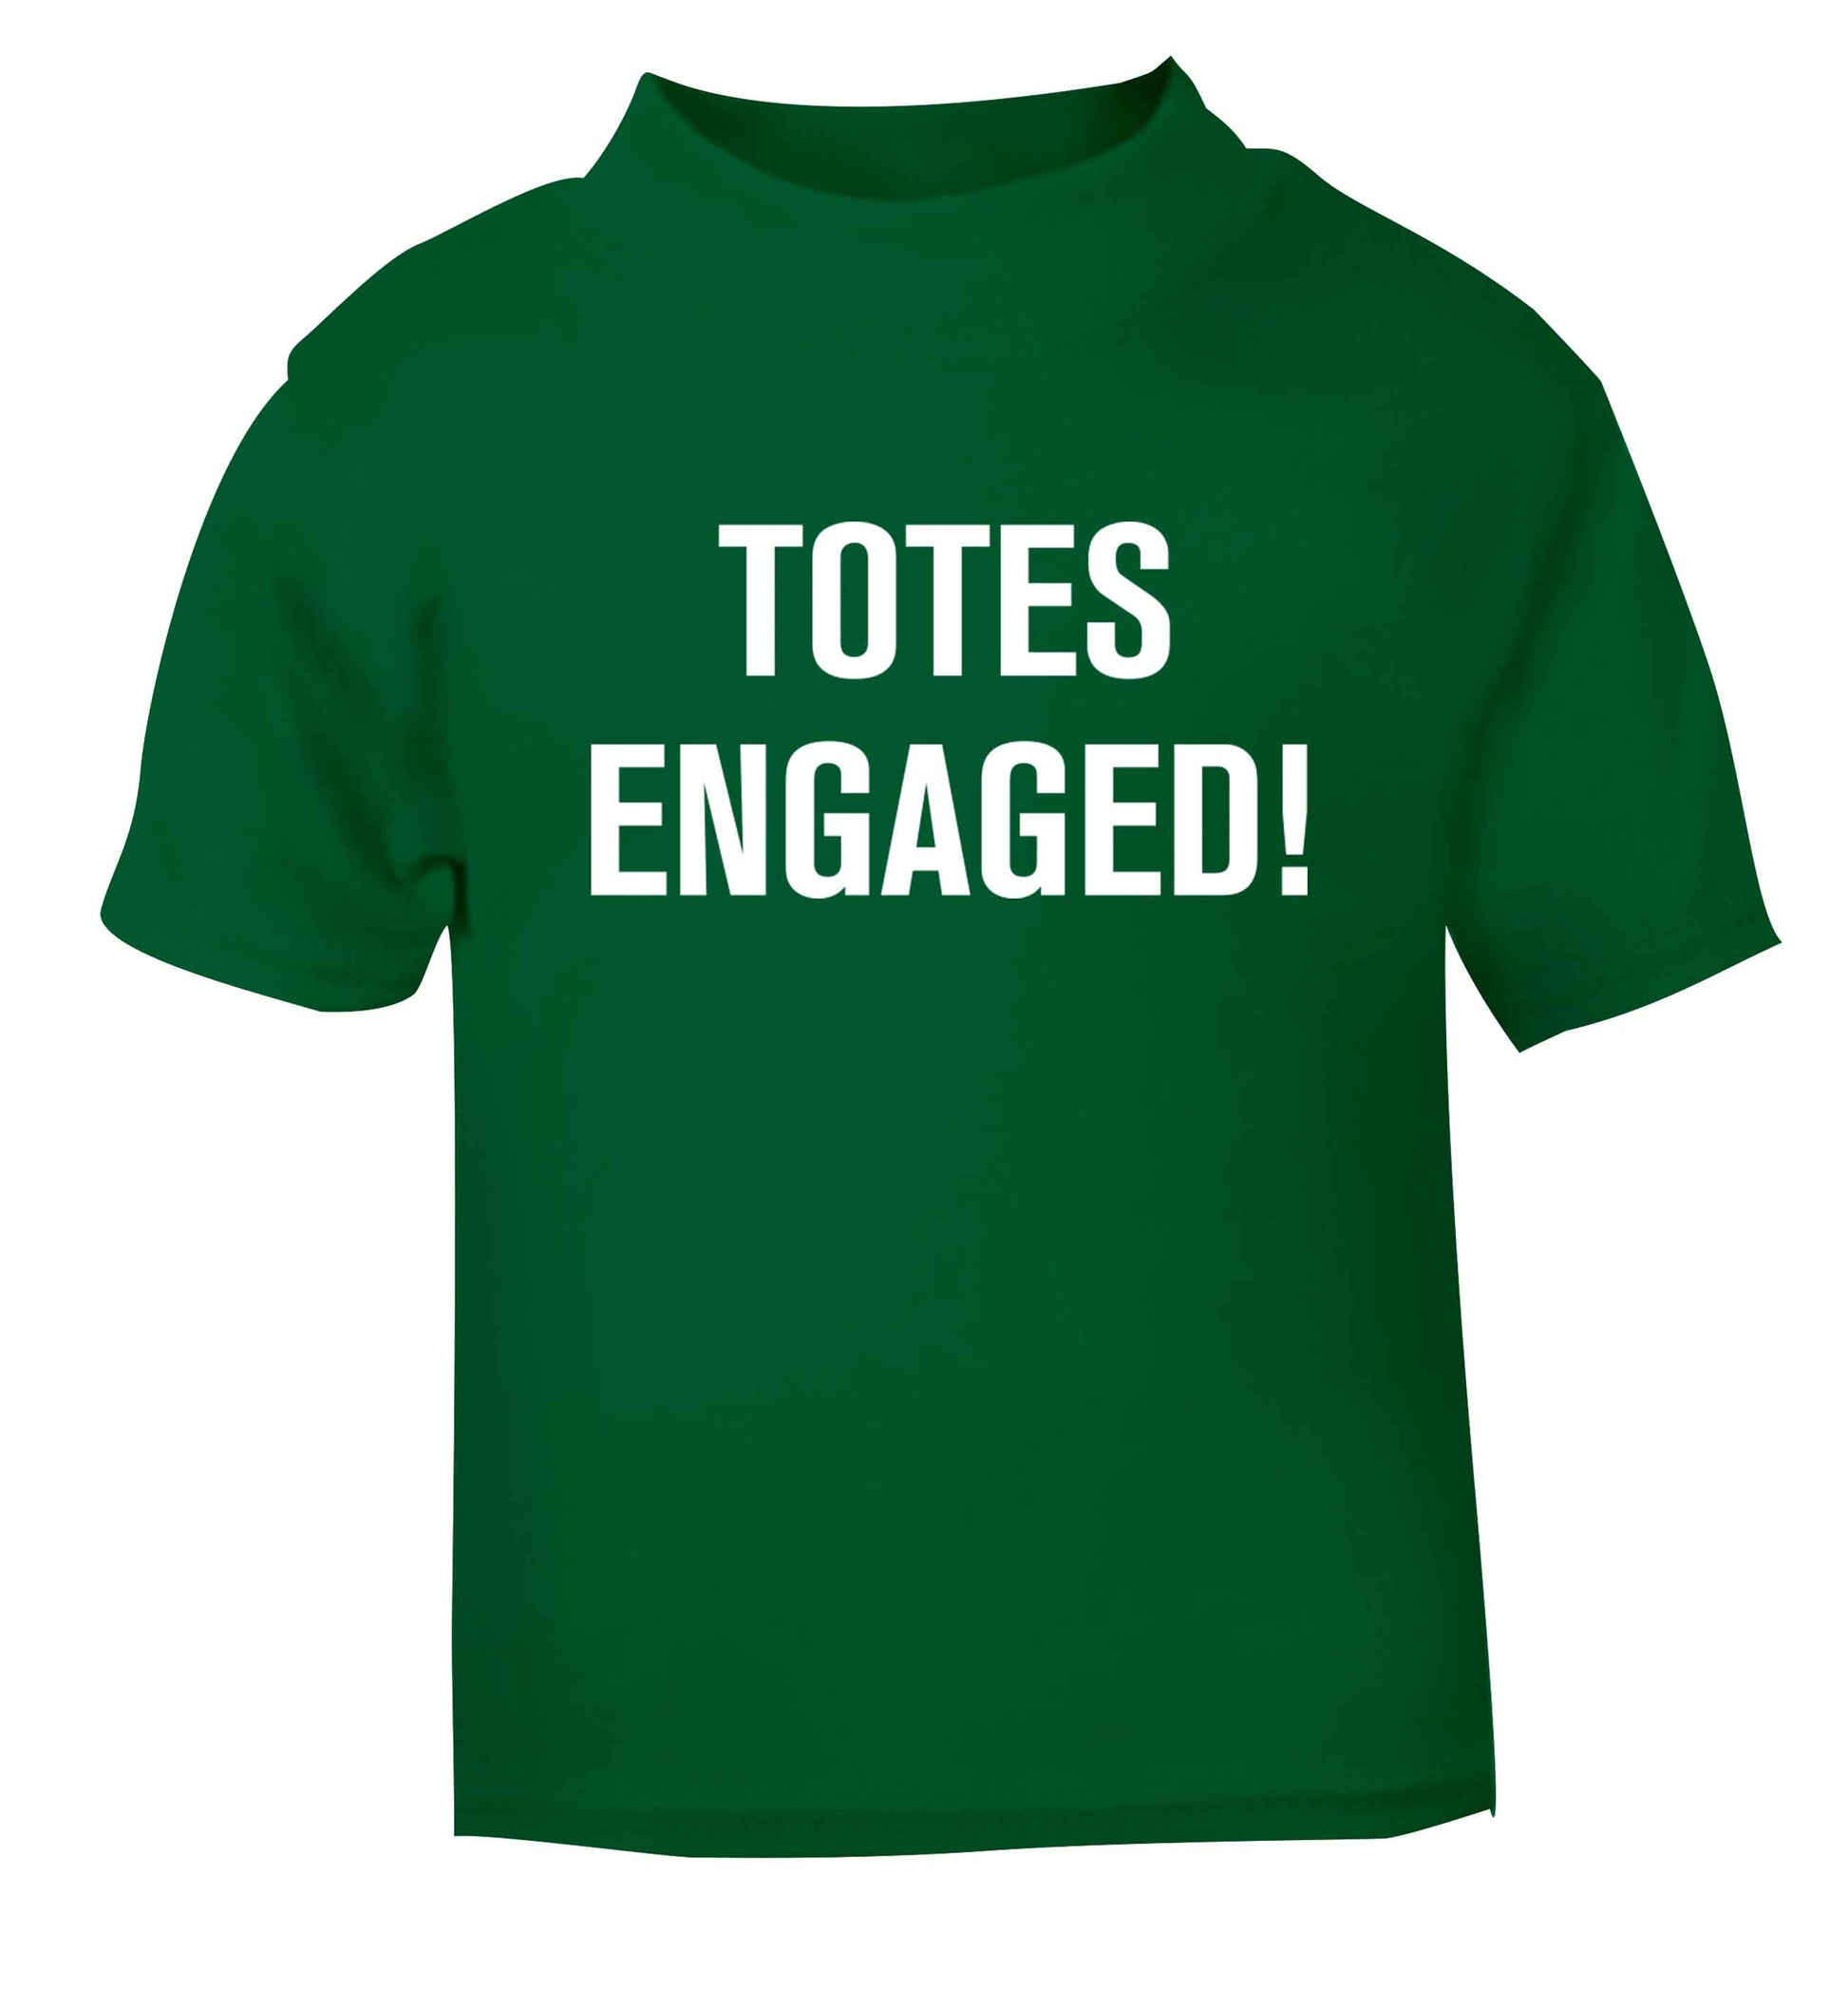 Totes engaged green baby toddler Tshirt 2 Years